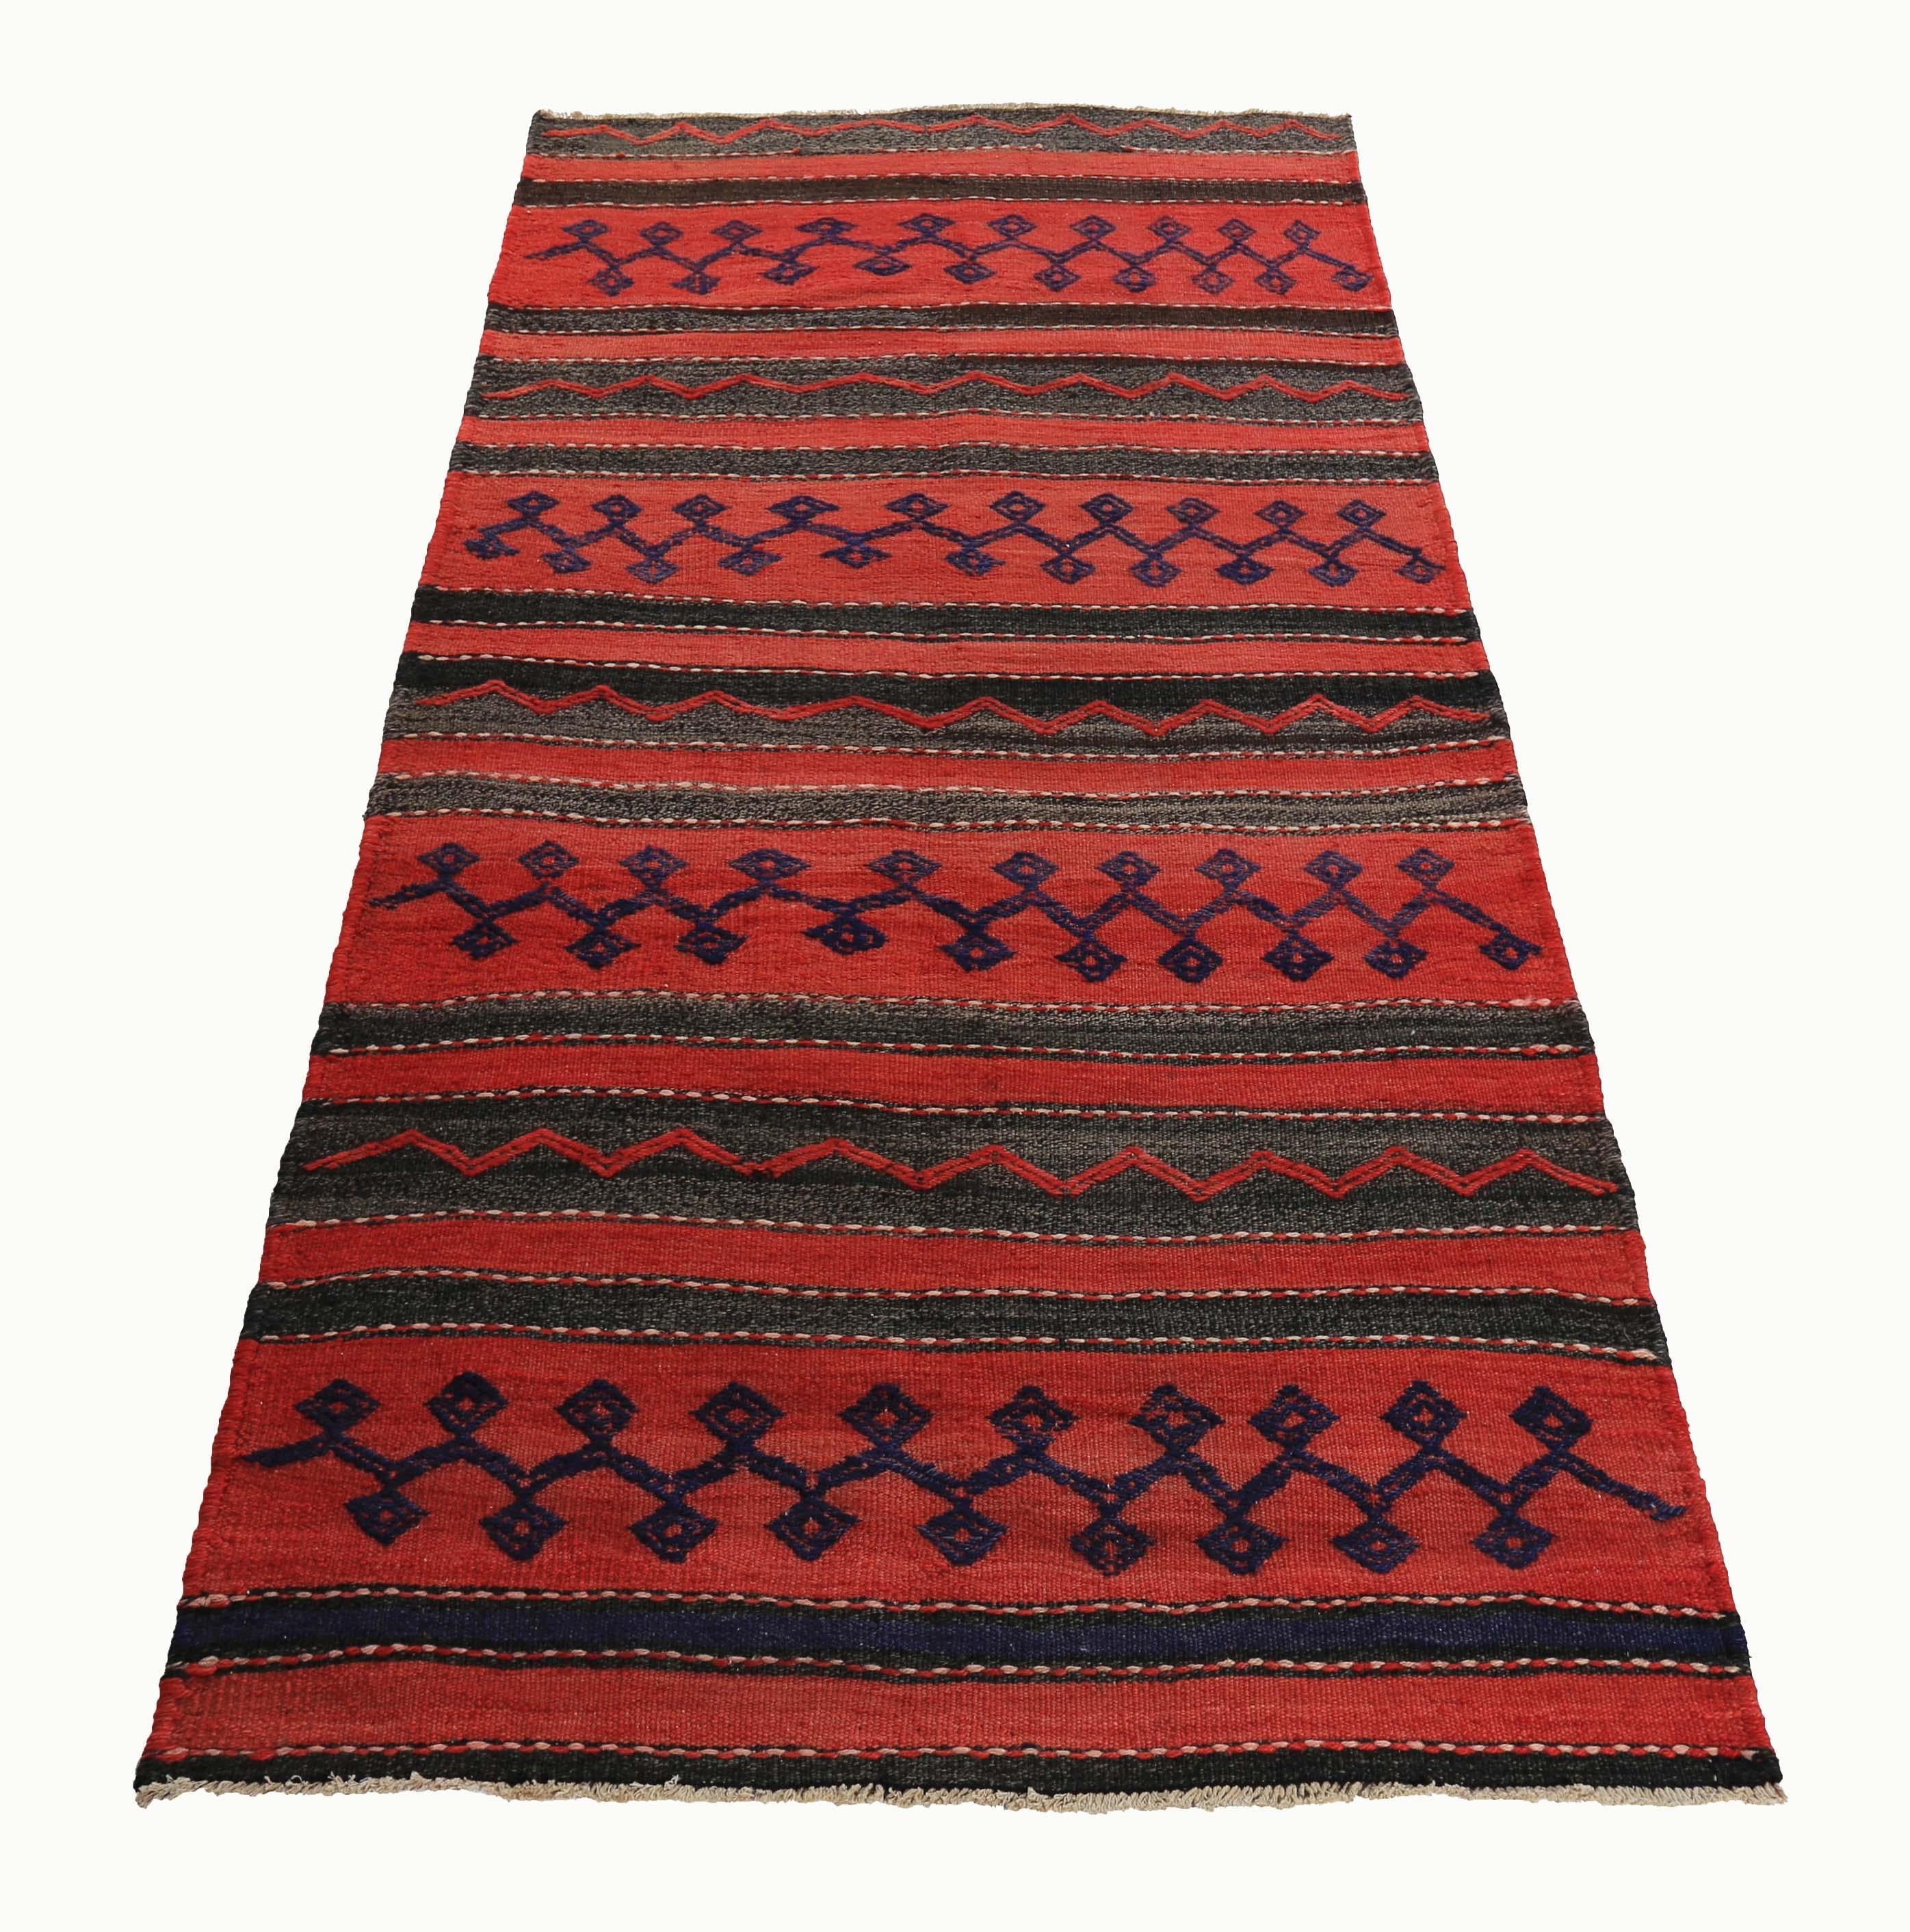 Turkish rug handwoven from the finest sheep’s wool and colored with all-natural vegetable dyes that are safe for humans and pets. It’s a traditional Kilim flat-weave design featuring a red and black field with tribal stripes in navy. It’s a stunning